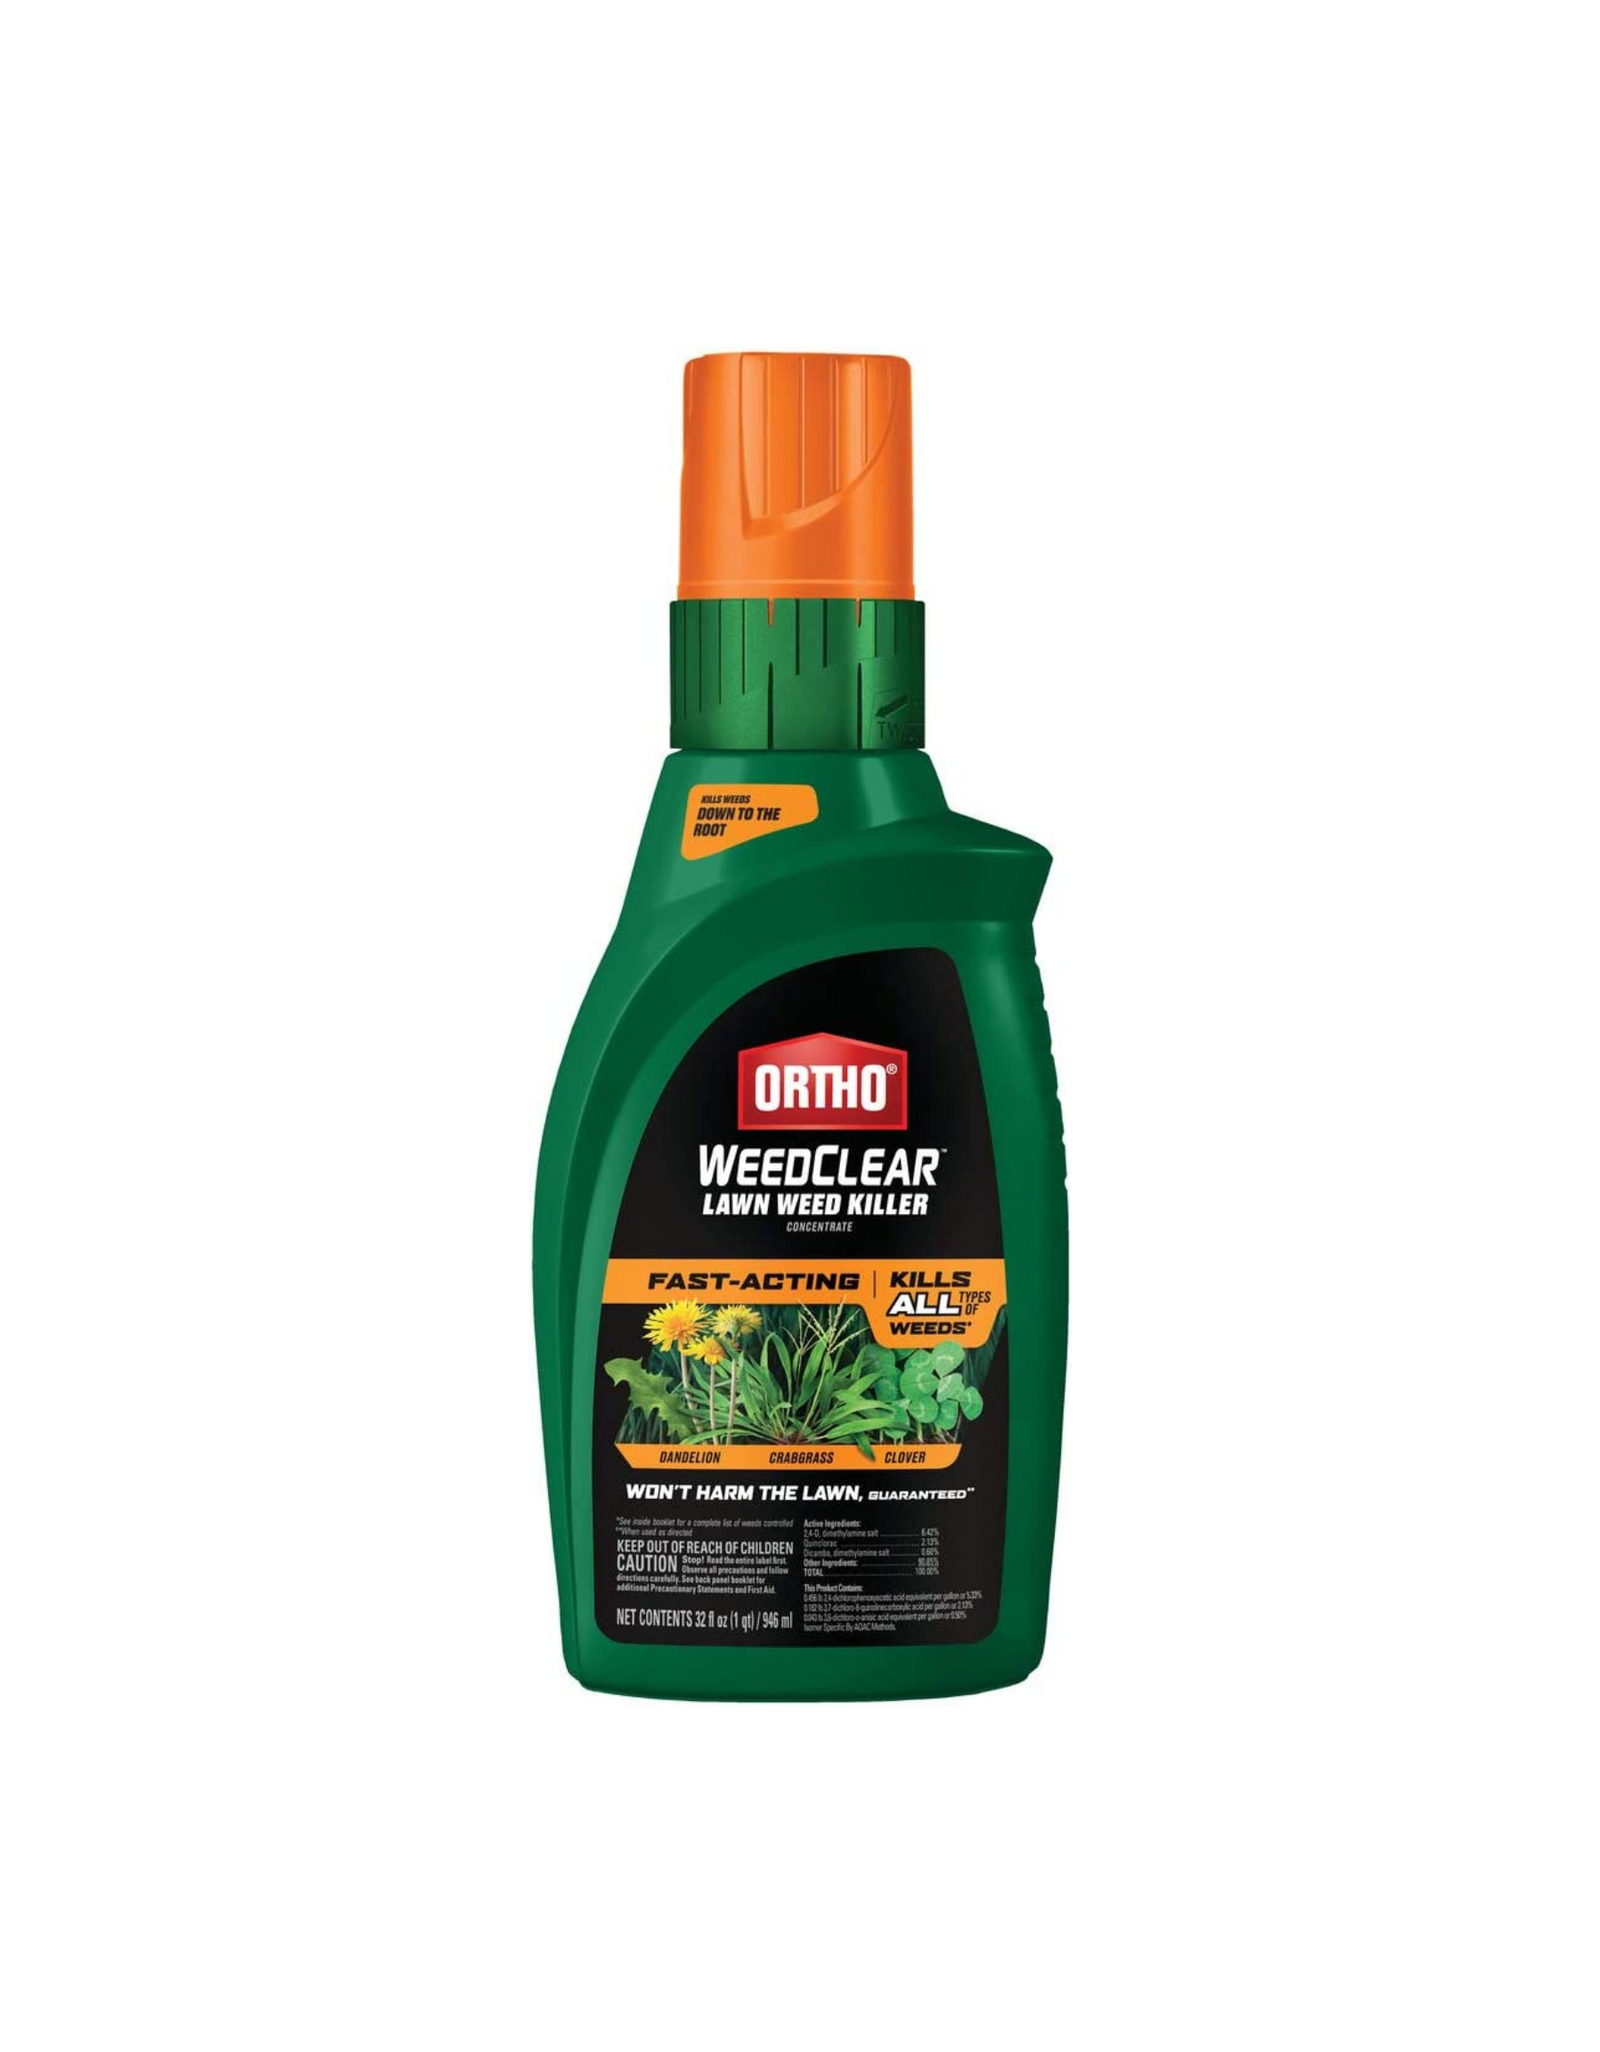 Ortho WeedClearLawn Weed Killer Concentrate, Fast-Acting, Kills Dandelion, Crabgrass and Clover to the Root, 32 oz.